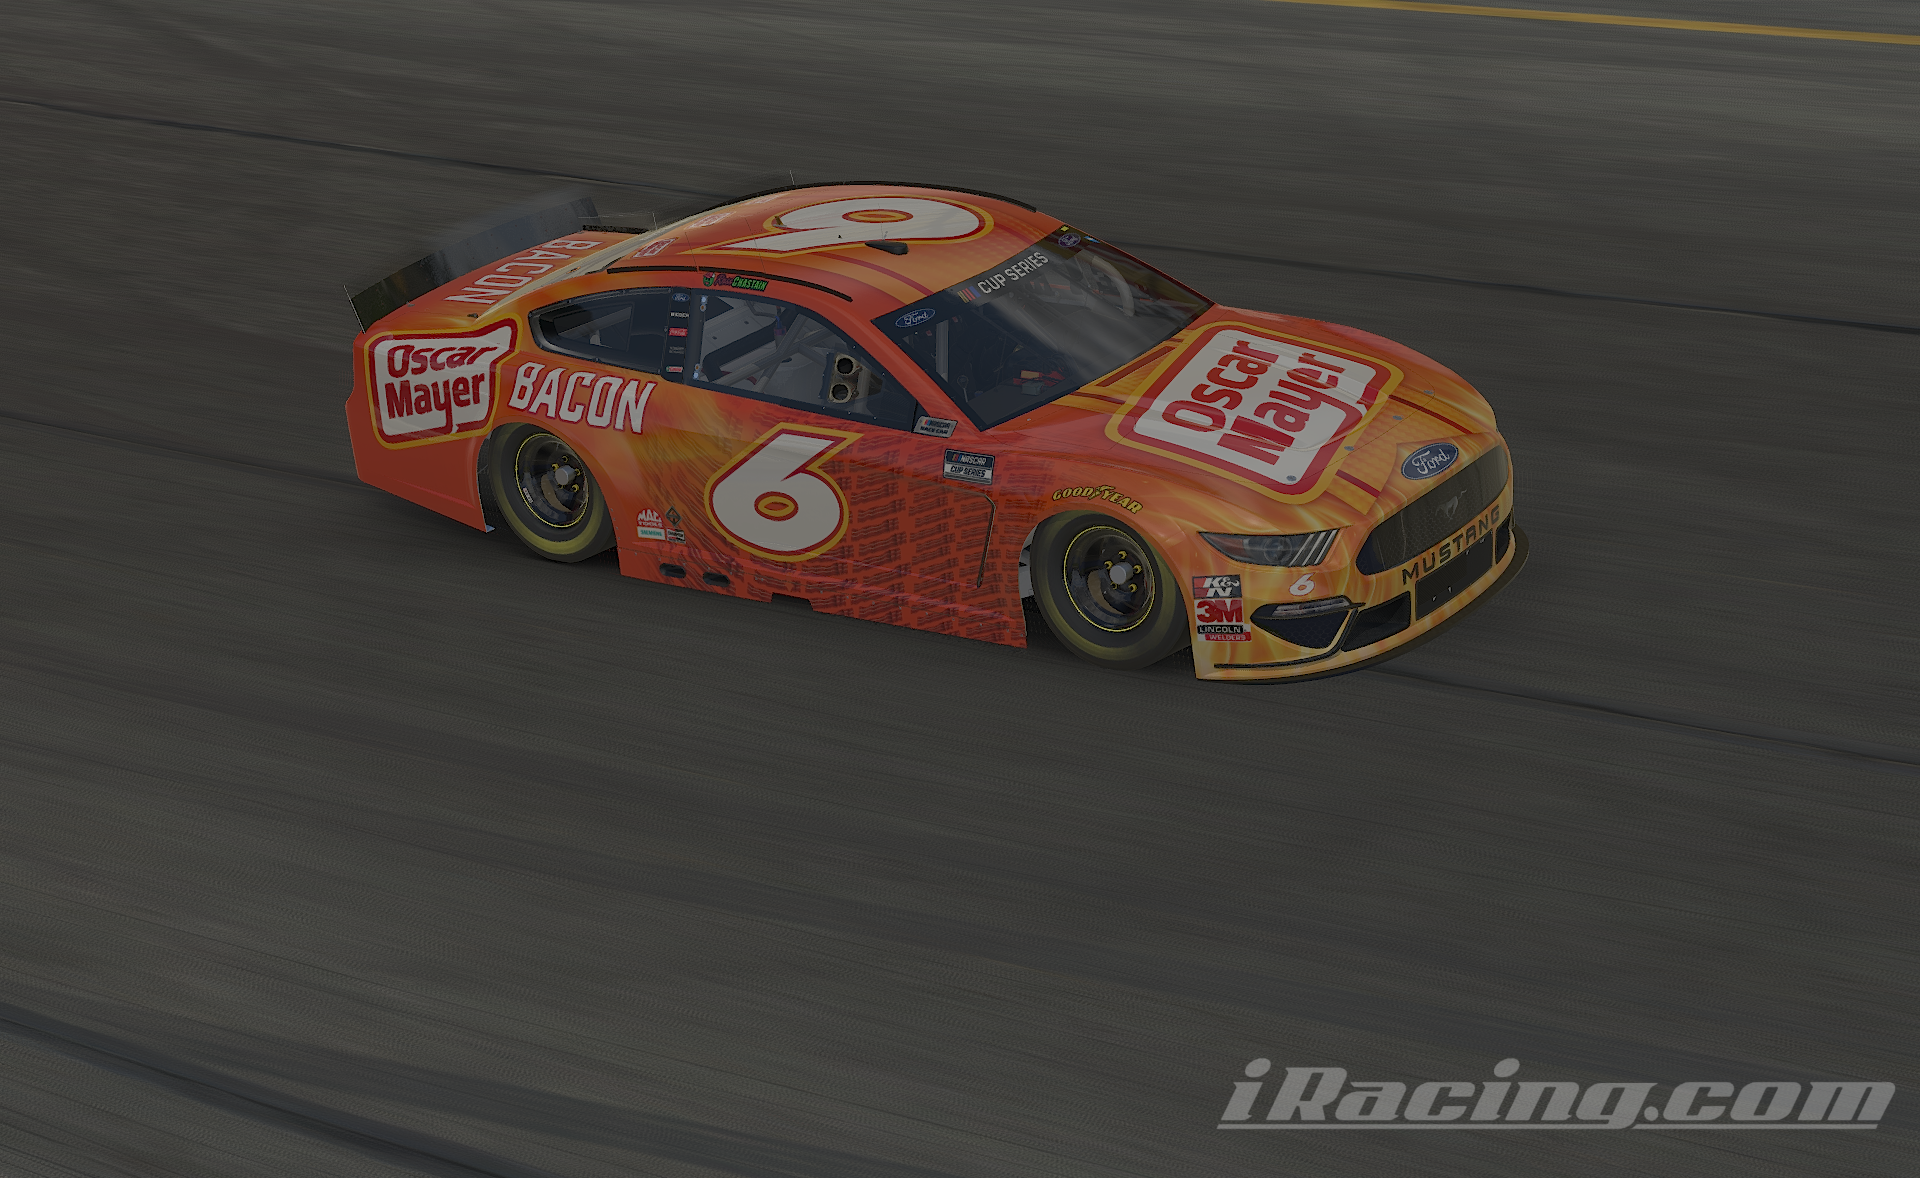 Eventful Day for Roush Fenway in iRacing #ProInvitationalSeries